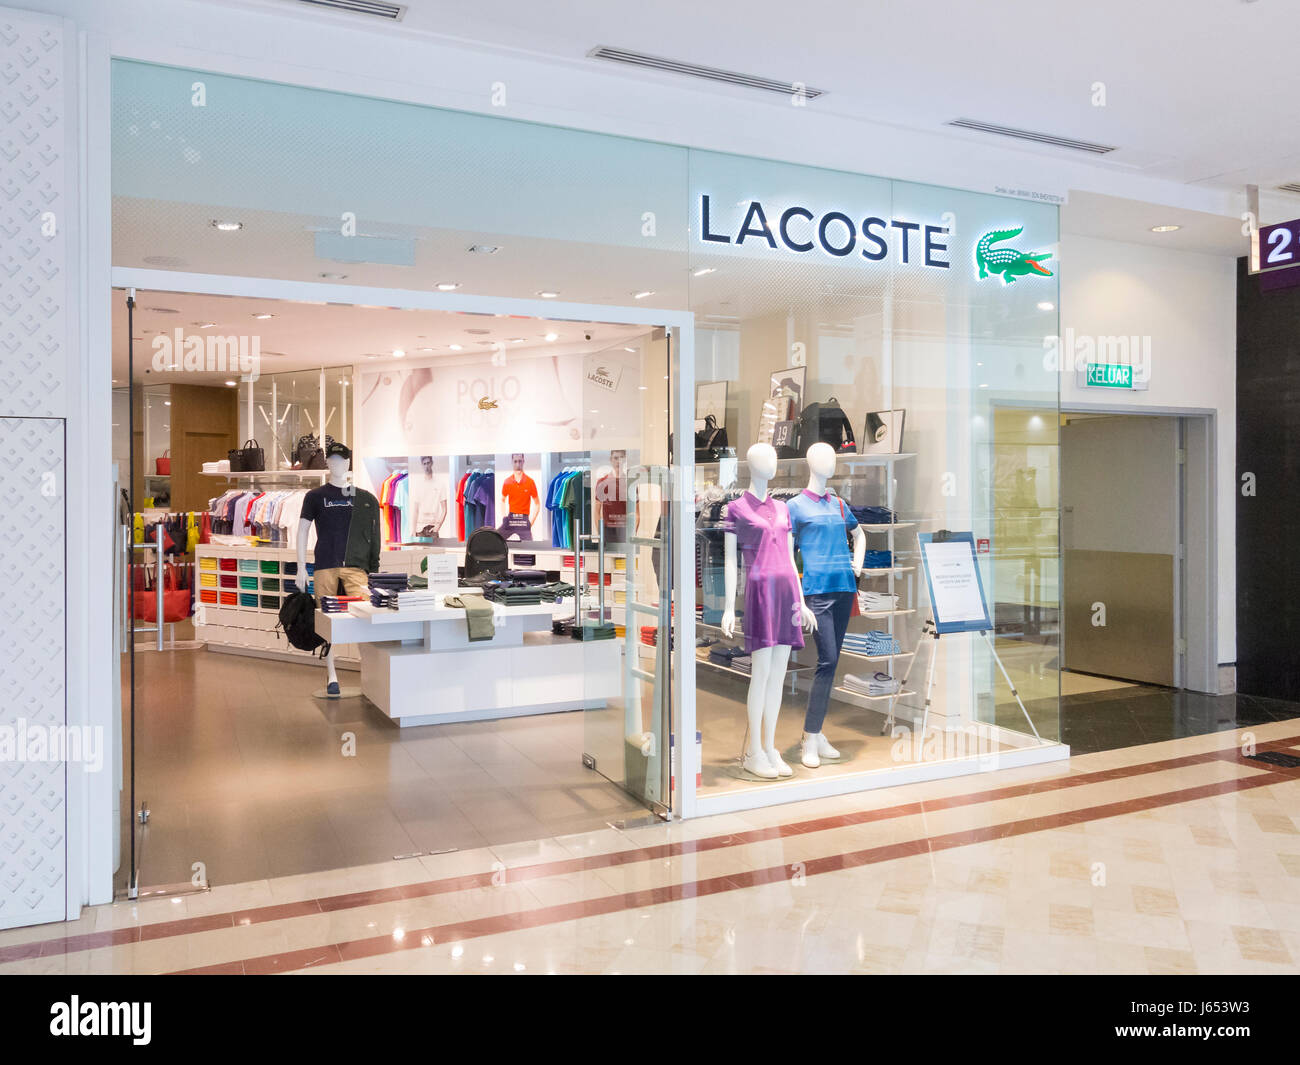 lacoste mitsui outlet